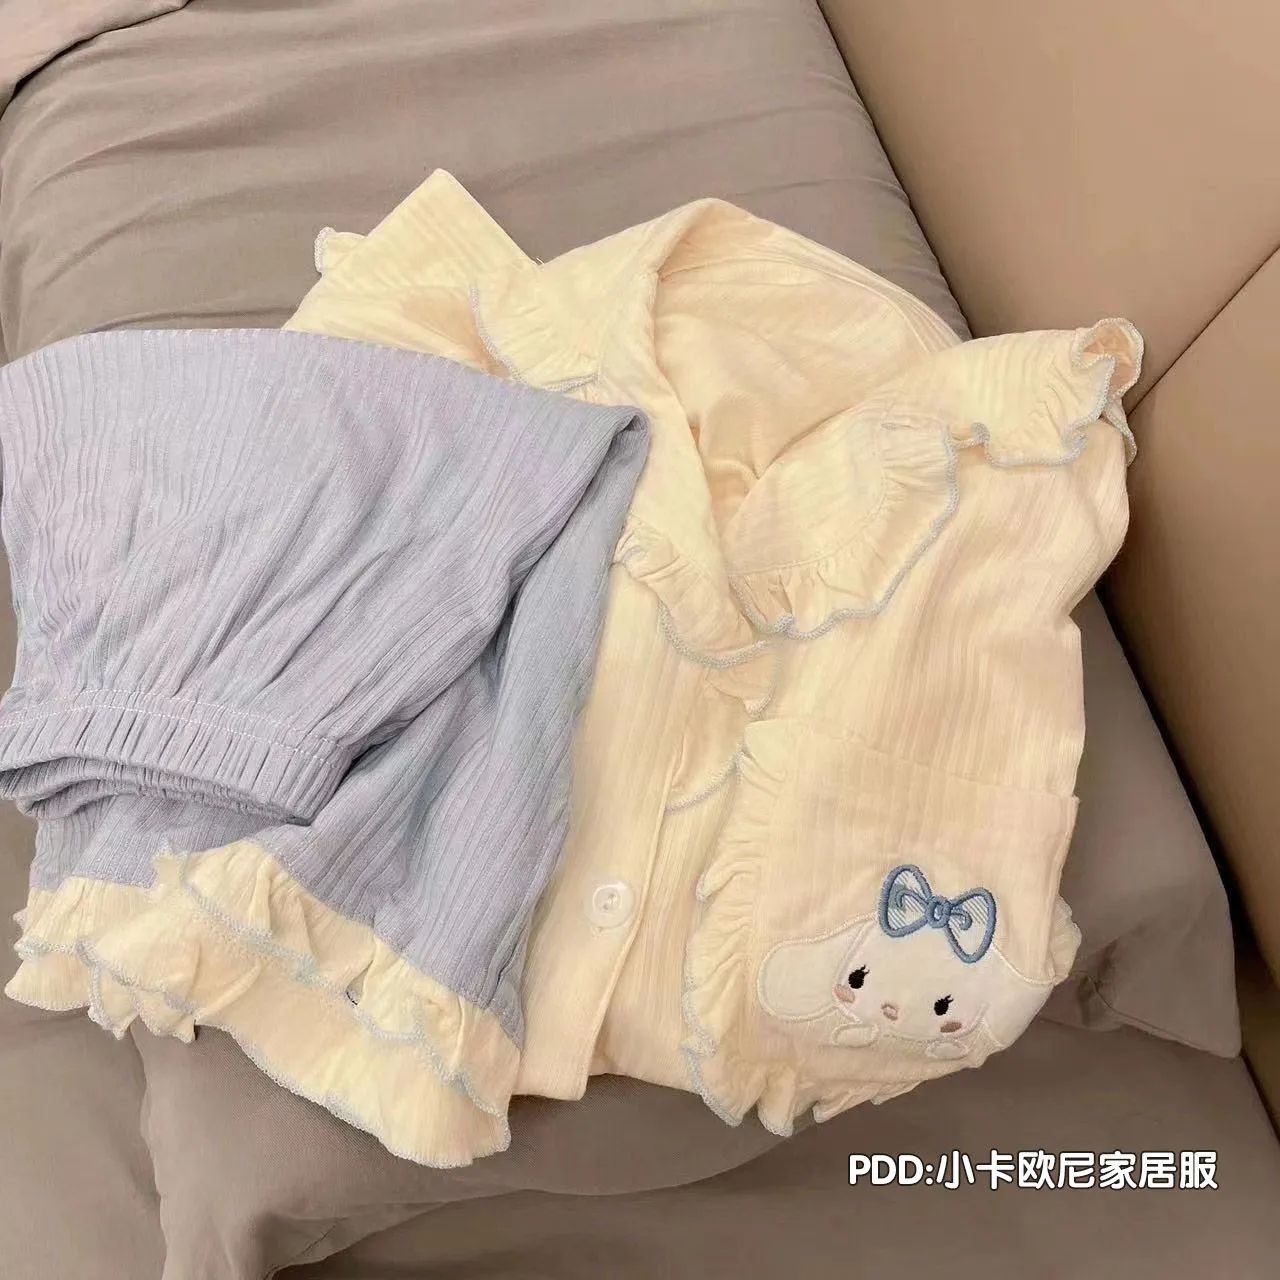 Pajamas women's summer Korean pajamas high-value short-sleeved thin section ins style cinnamon dog girl home clothes can be worn outside